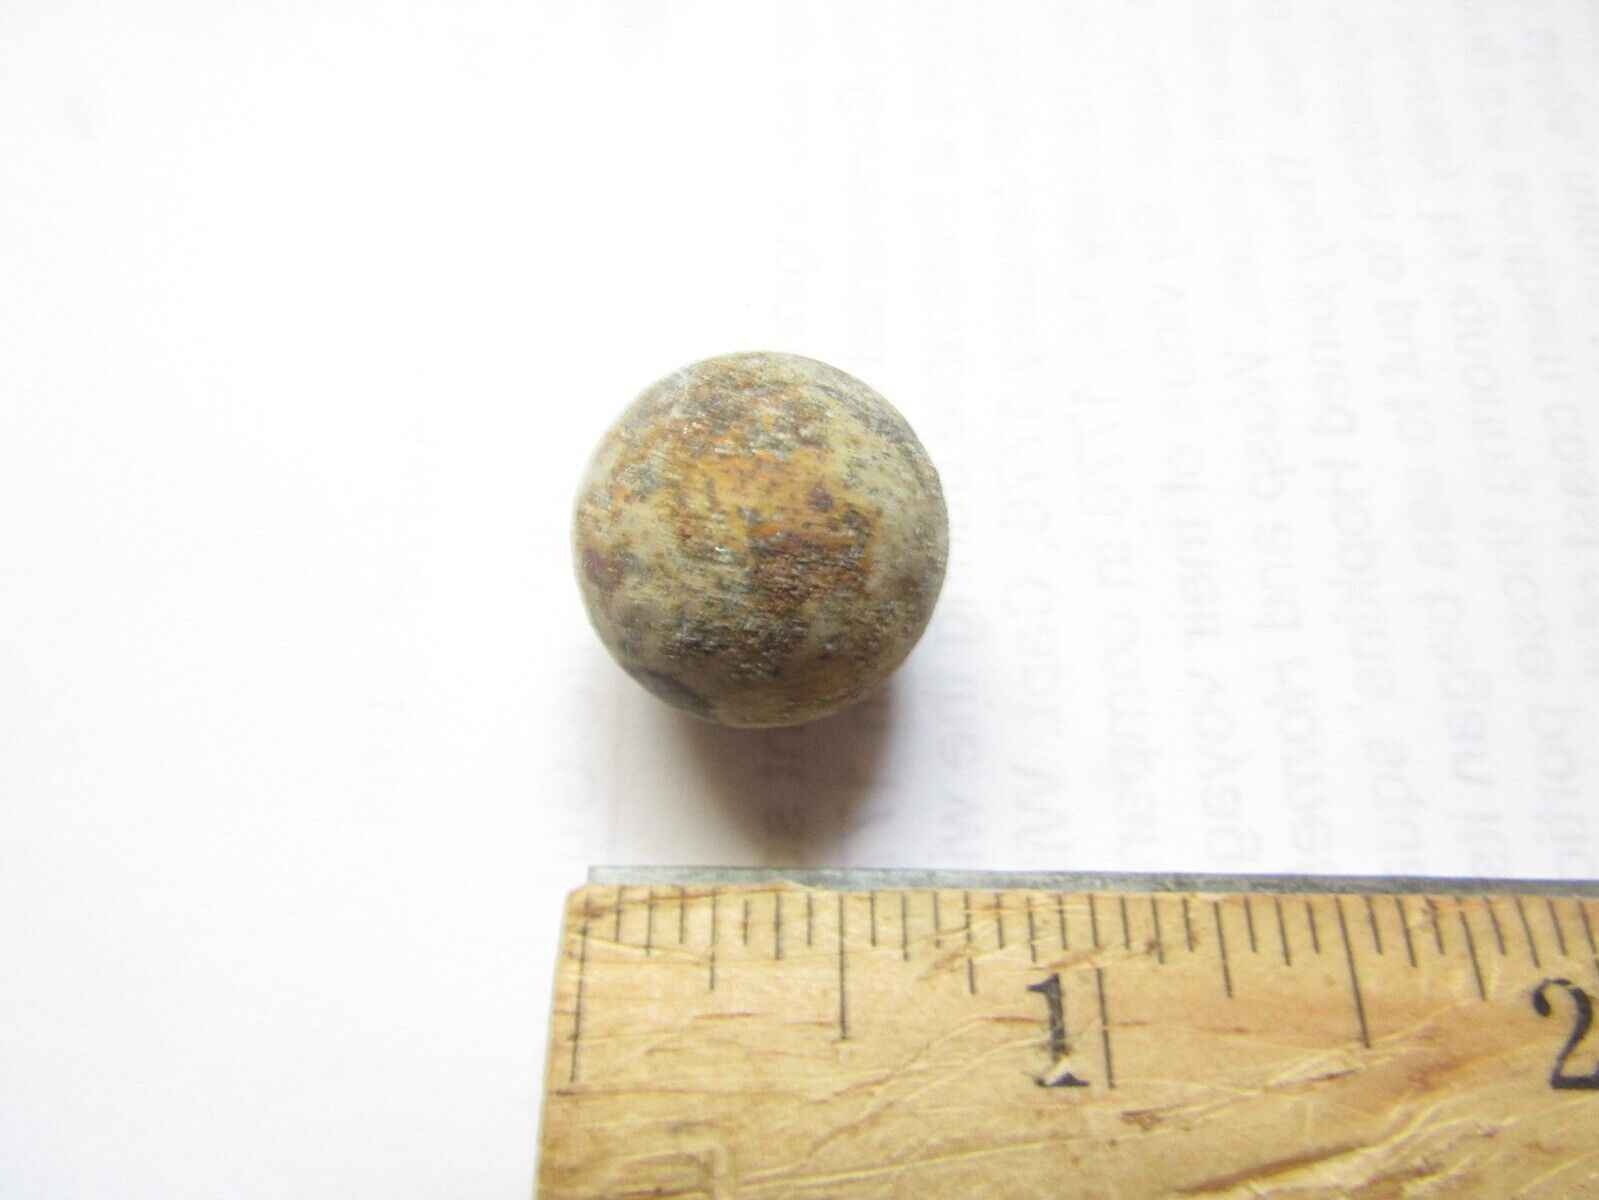 BUNKER HILL,3rd. NEW HAMPSHIRE REGT.AMERICAN .69  MUSKET BALL,, 1775